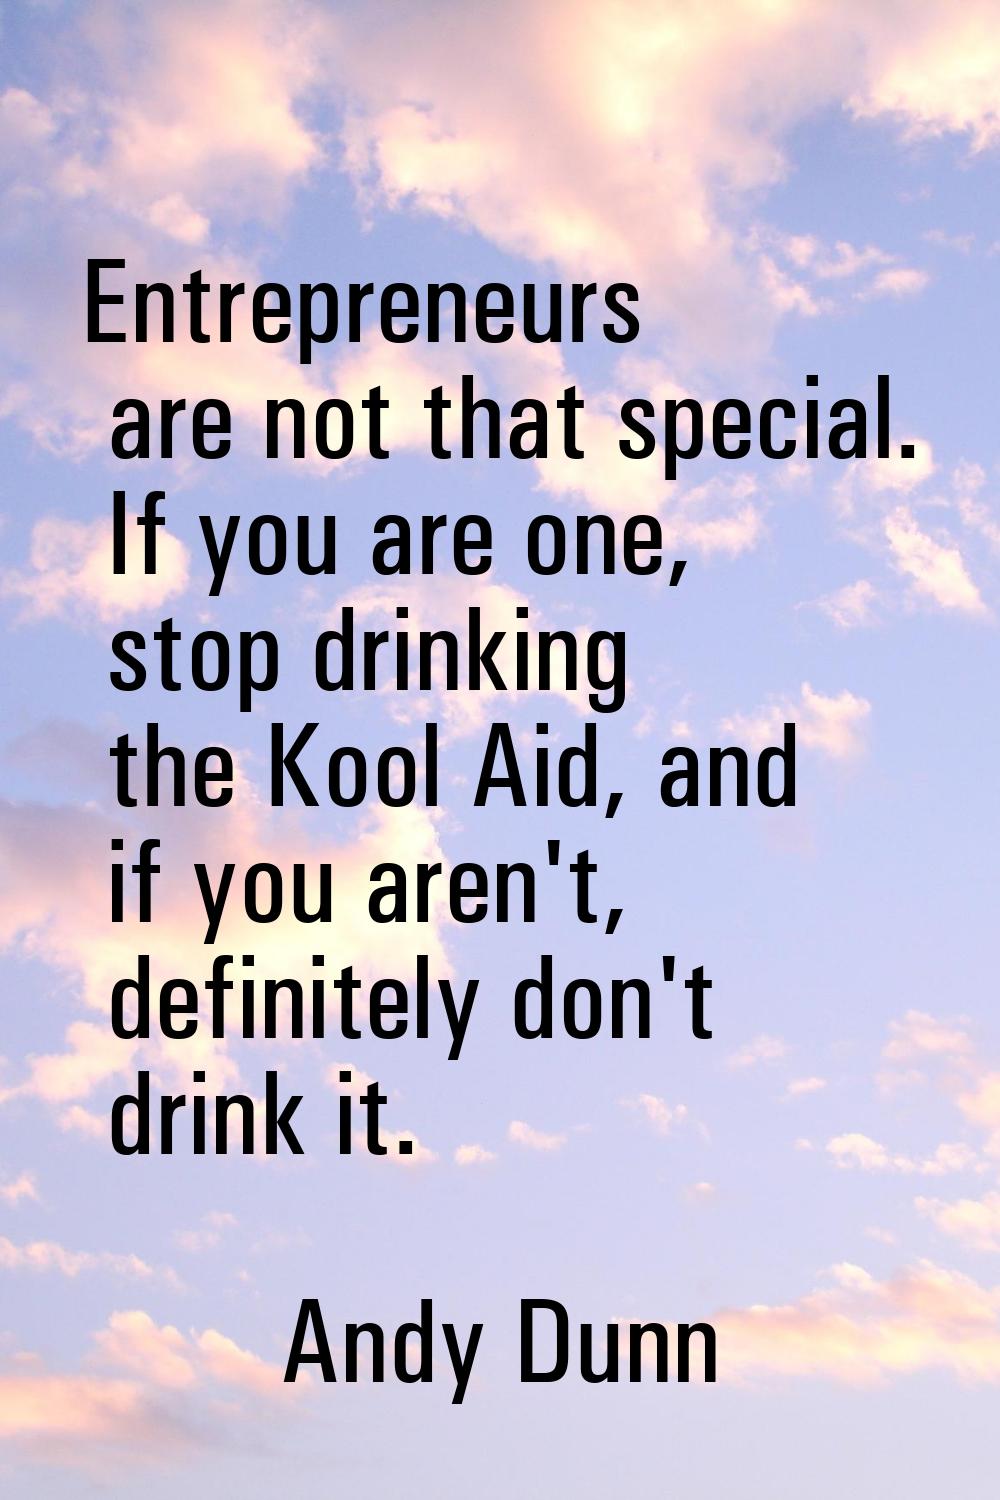 Entrepreneurs are not that special. If you are one, stop drinking the Kool Aid, and if you aren't, 